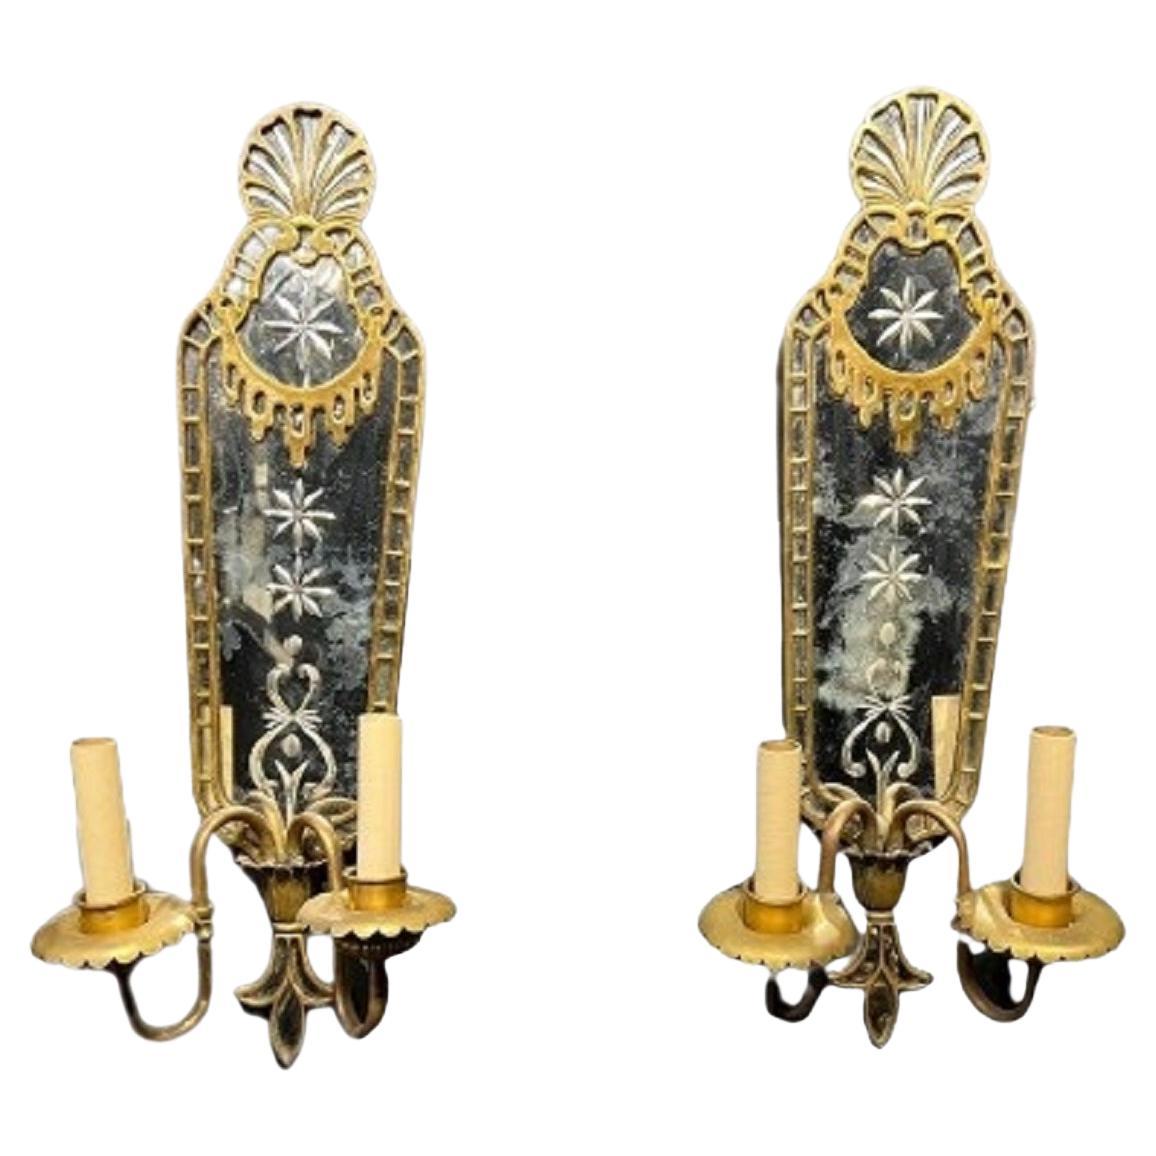 1920s Mirror Sconces with Bronze Fittings